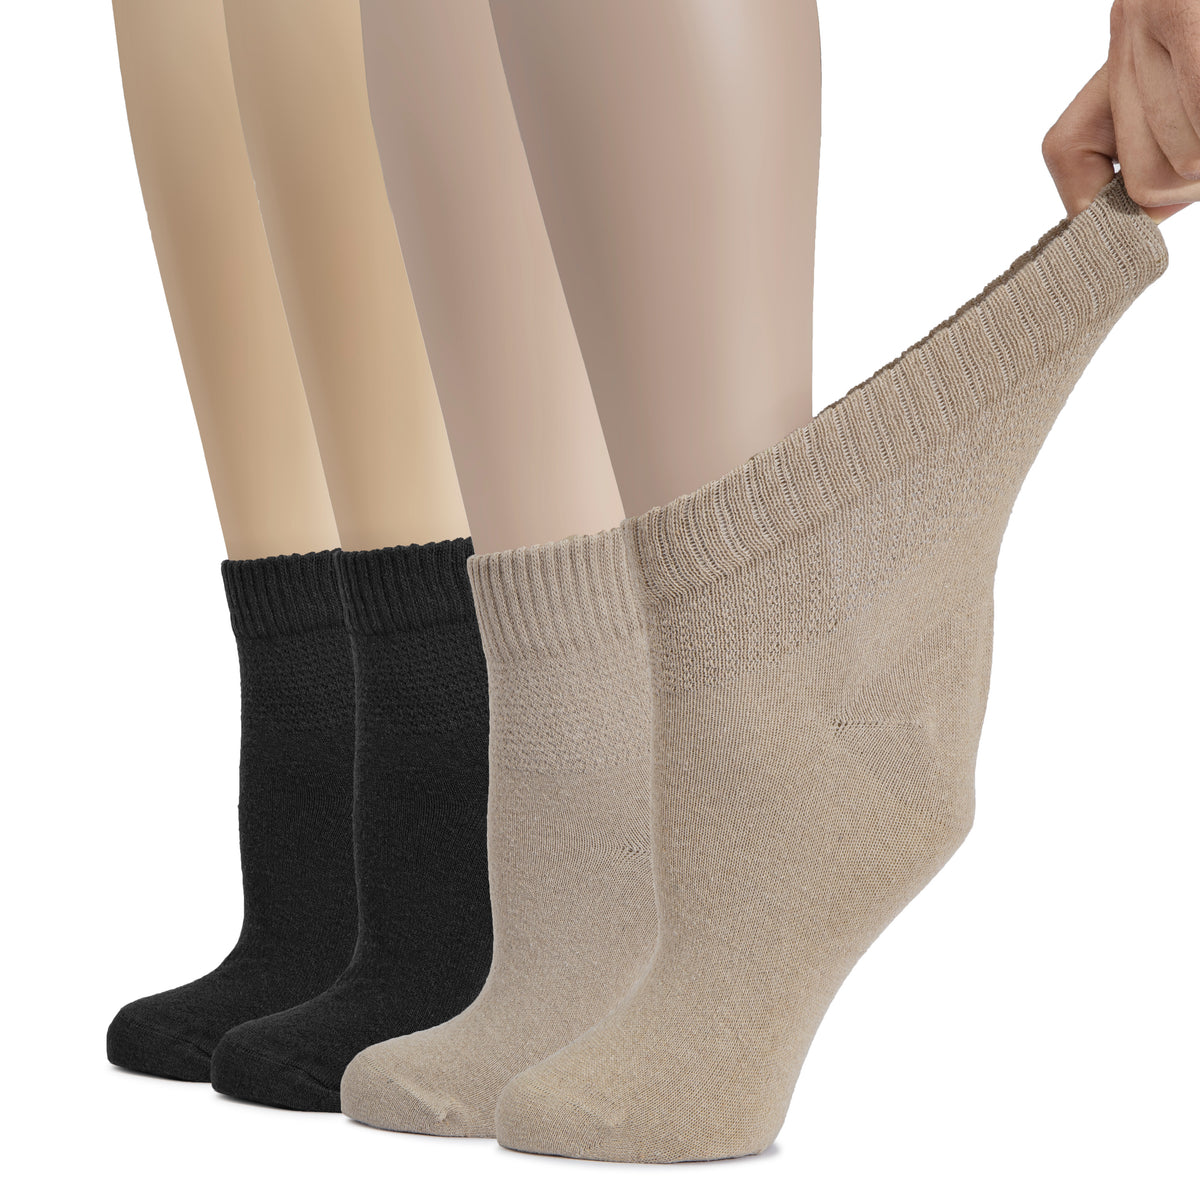 Hugh Ugoli Cotton Diabetic Women's Socks, Ankle Height, Loose, Wide Stretchy, Thin, Seamless Toe and Non-Binding Top, 4 Pairs | Shoe Size: 10-12 | Black / MelangeGrey